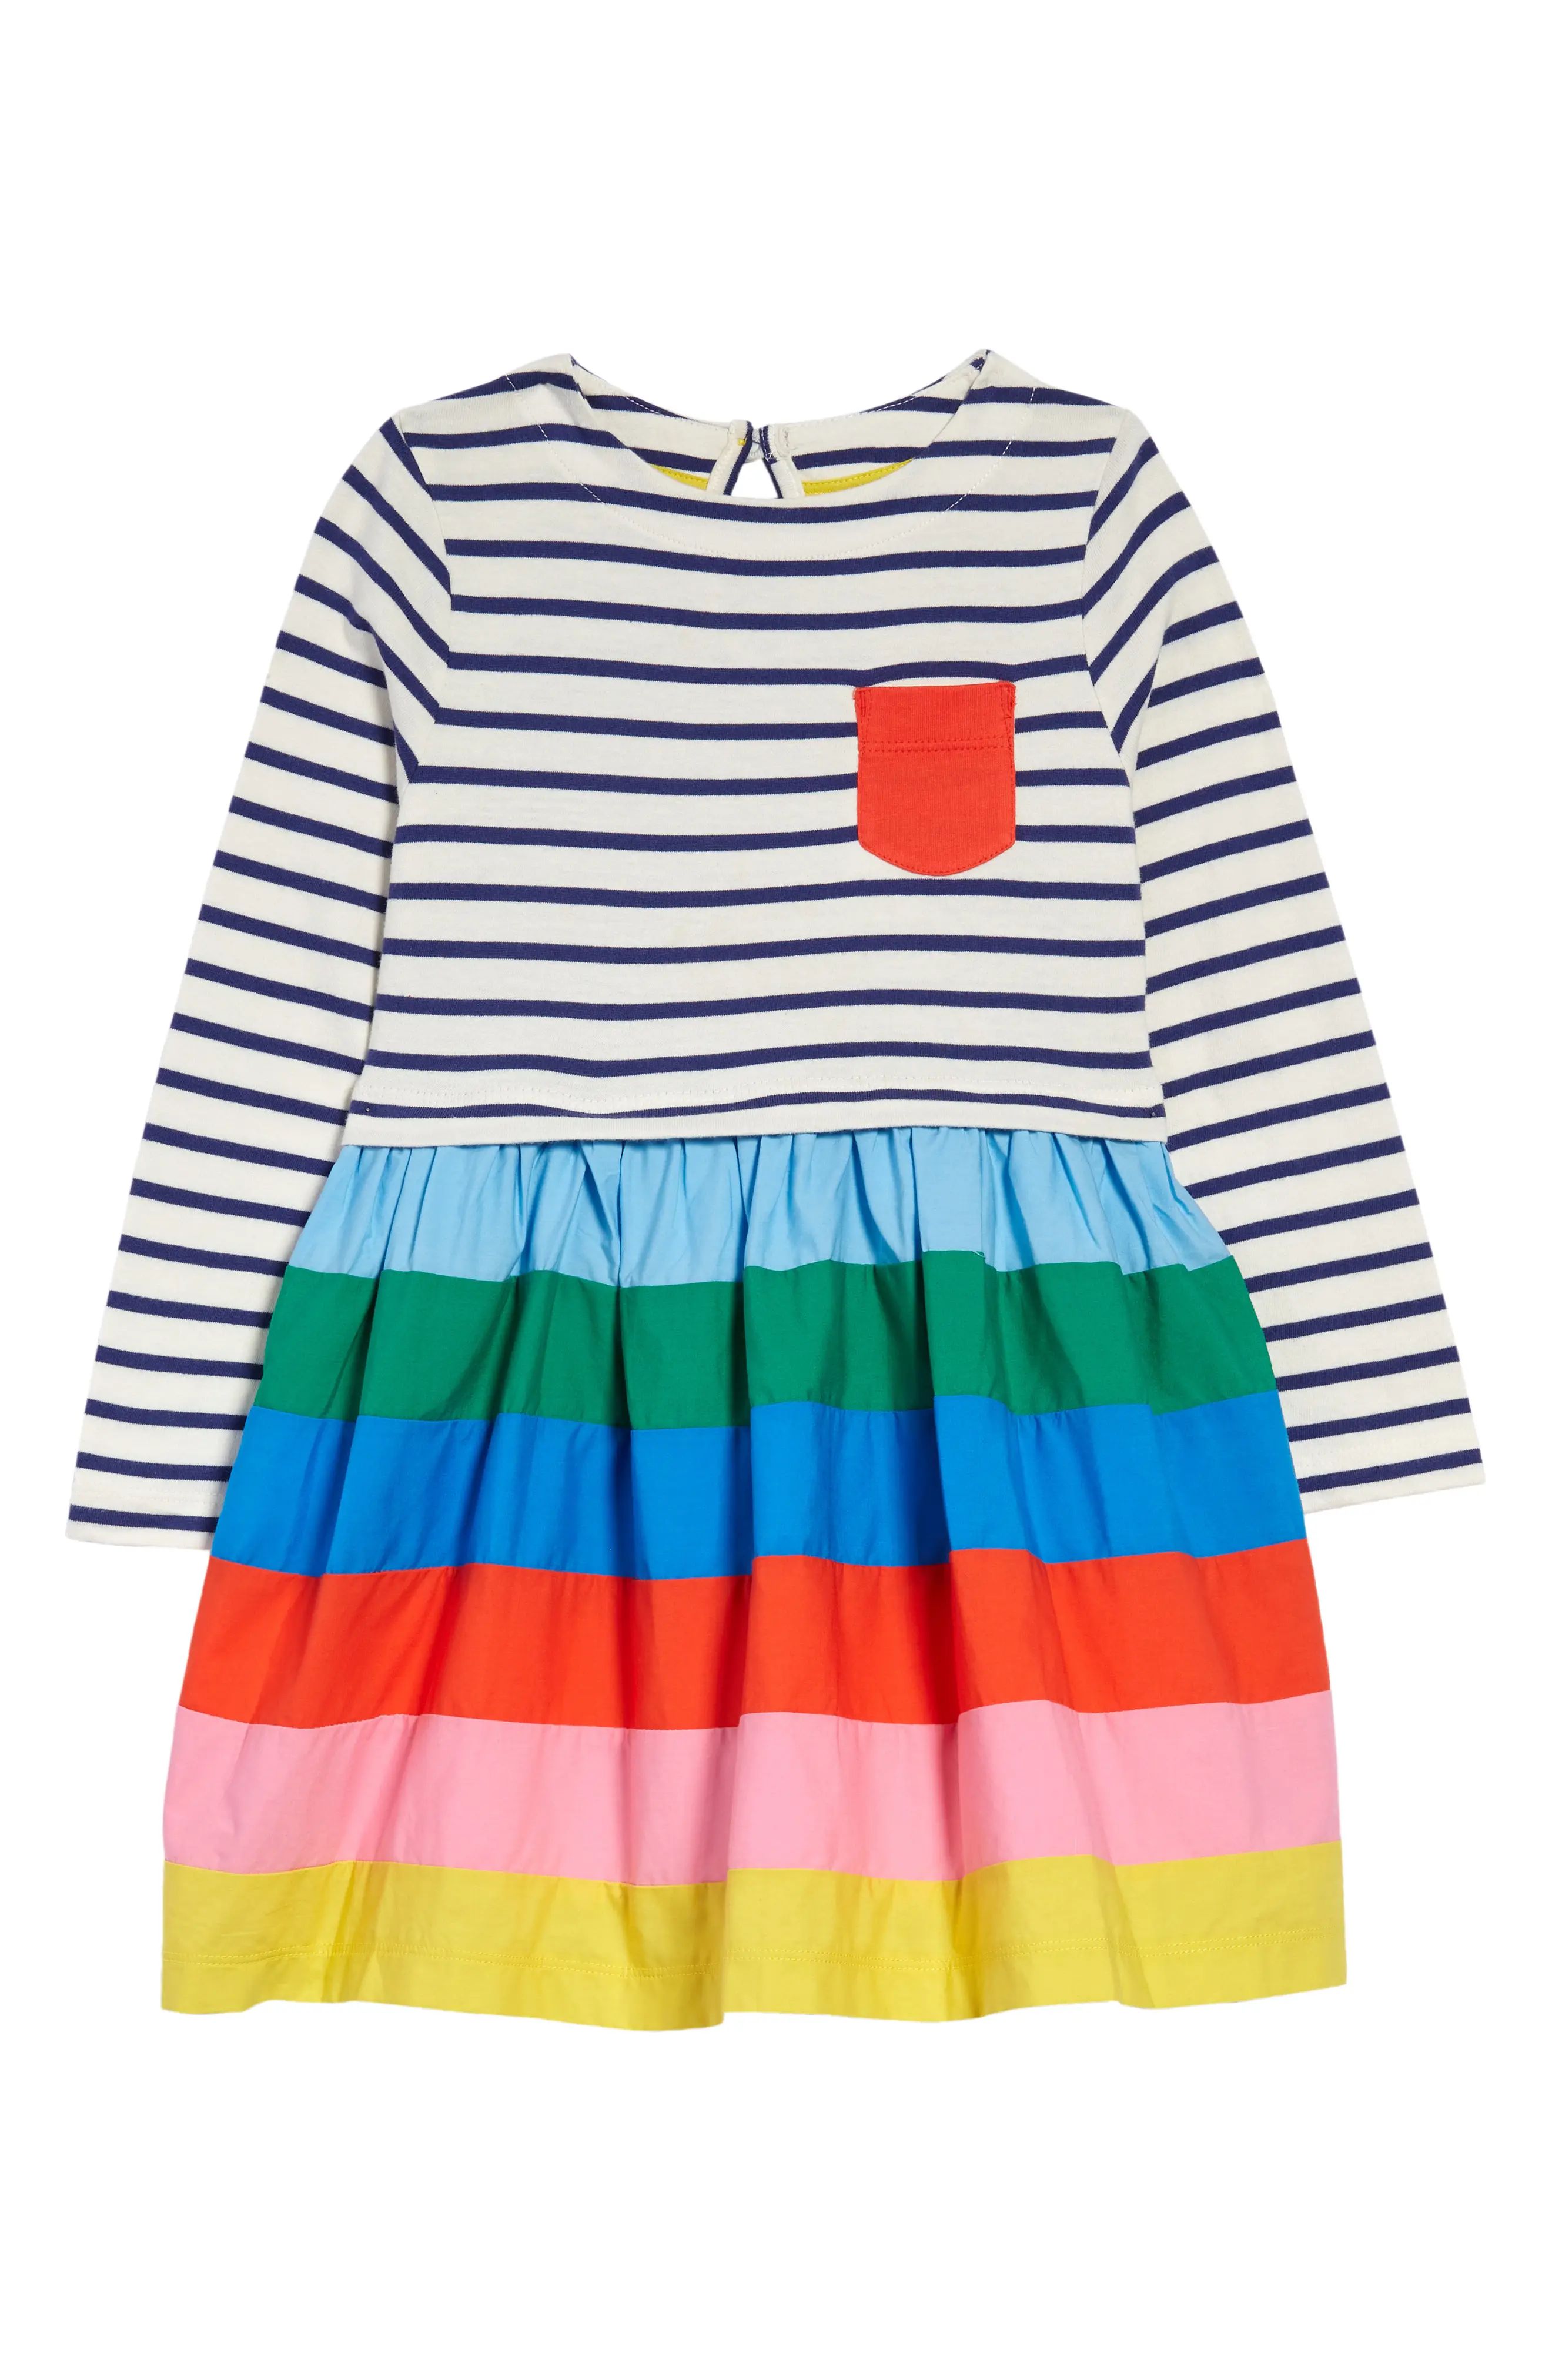 Mini Boden Kids' Hotchpotch Dress in Ivory/Starboard Blue Rainbow at Nordstrom, Size 2-3Y | Nordstrom